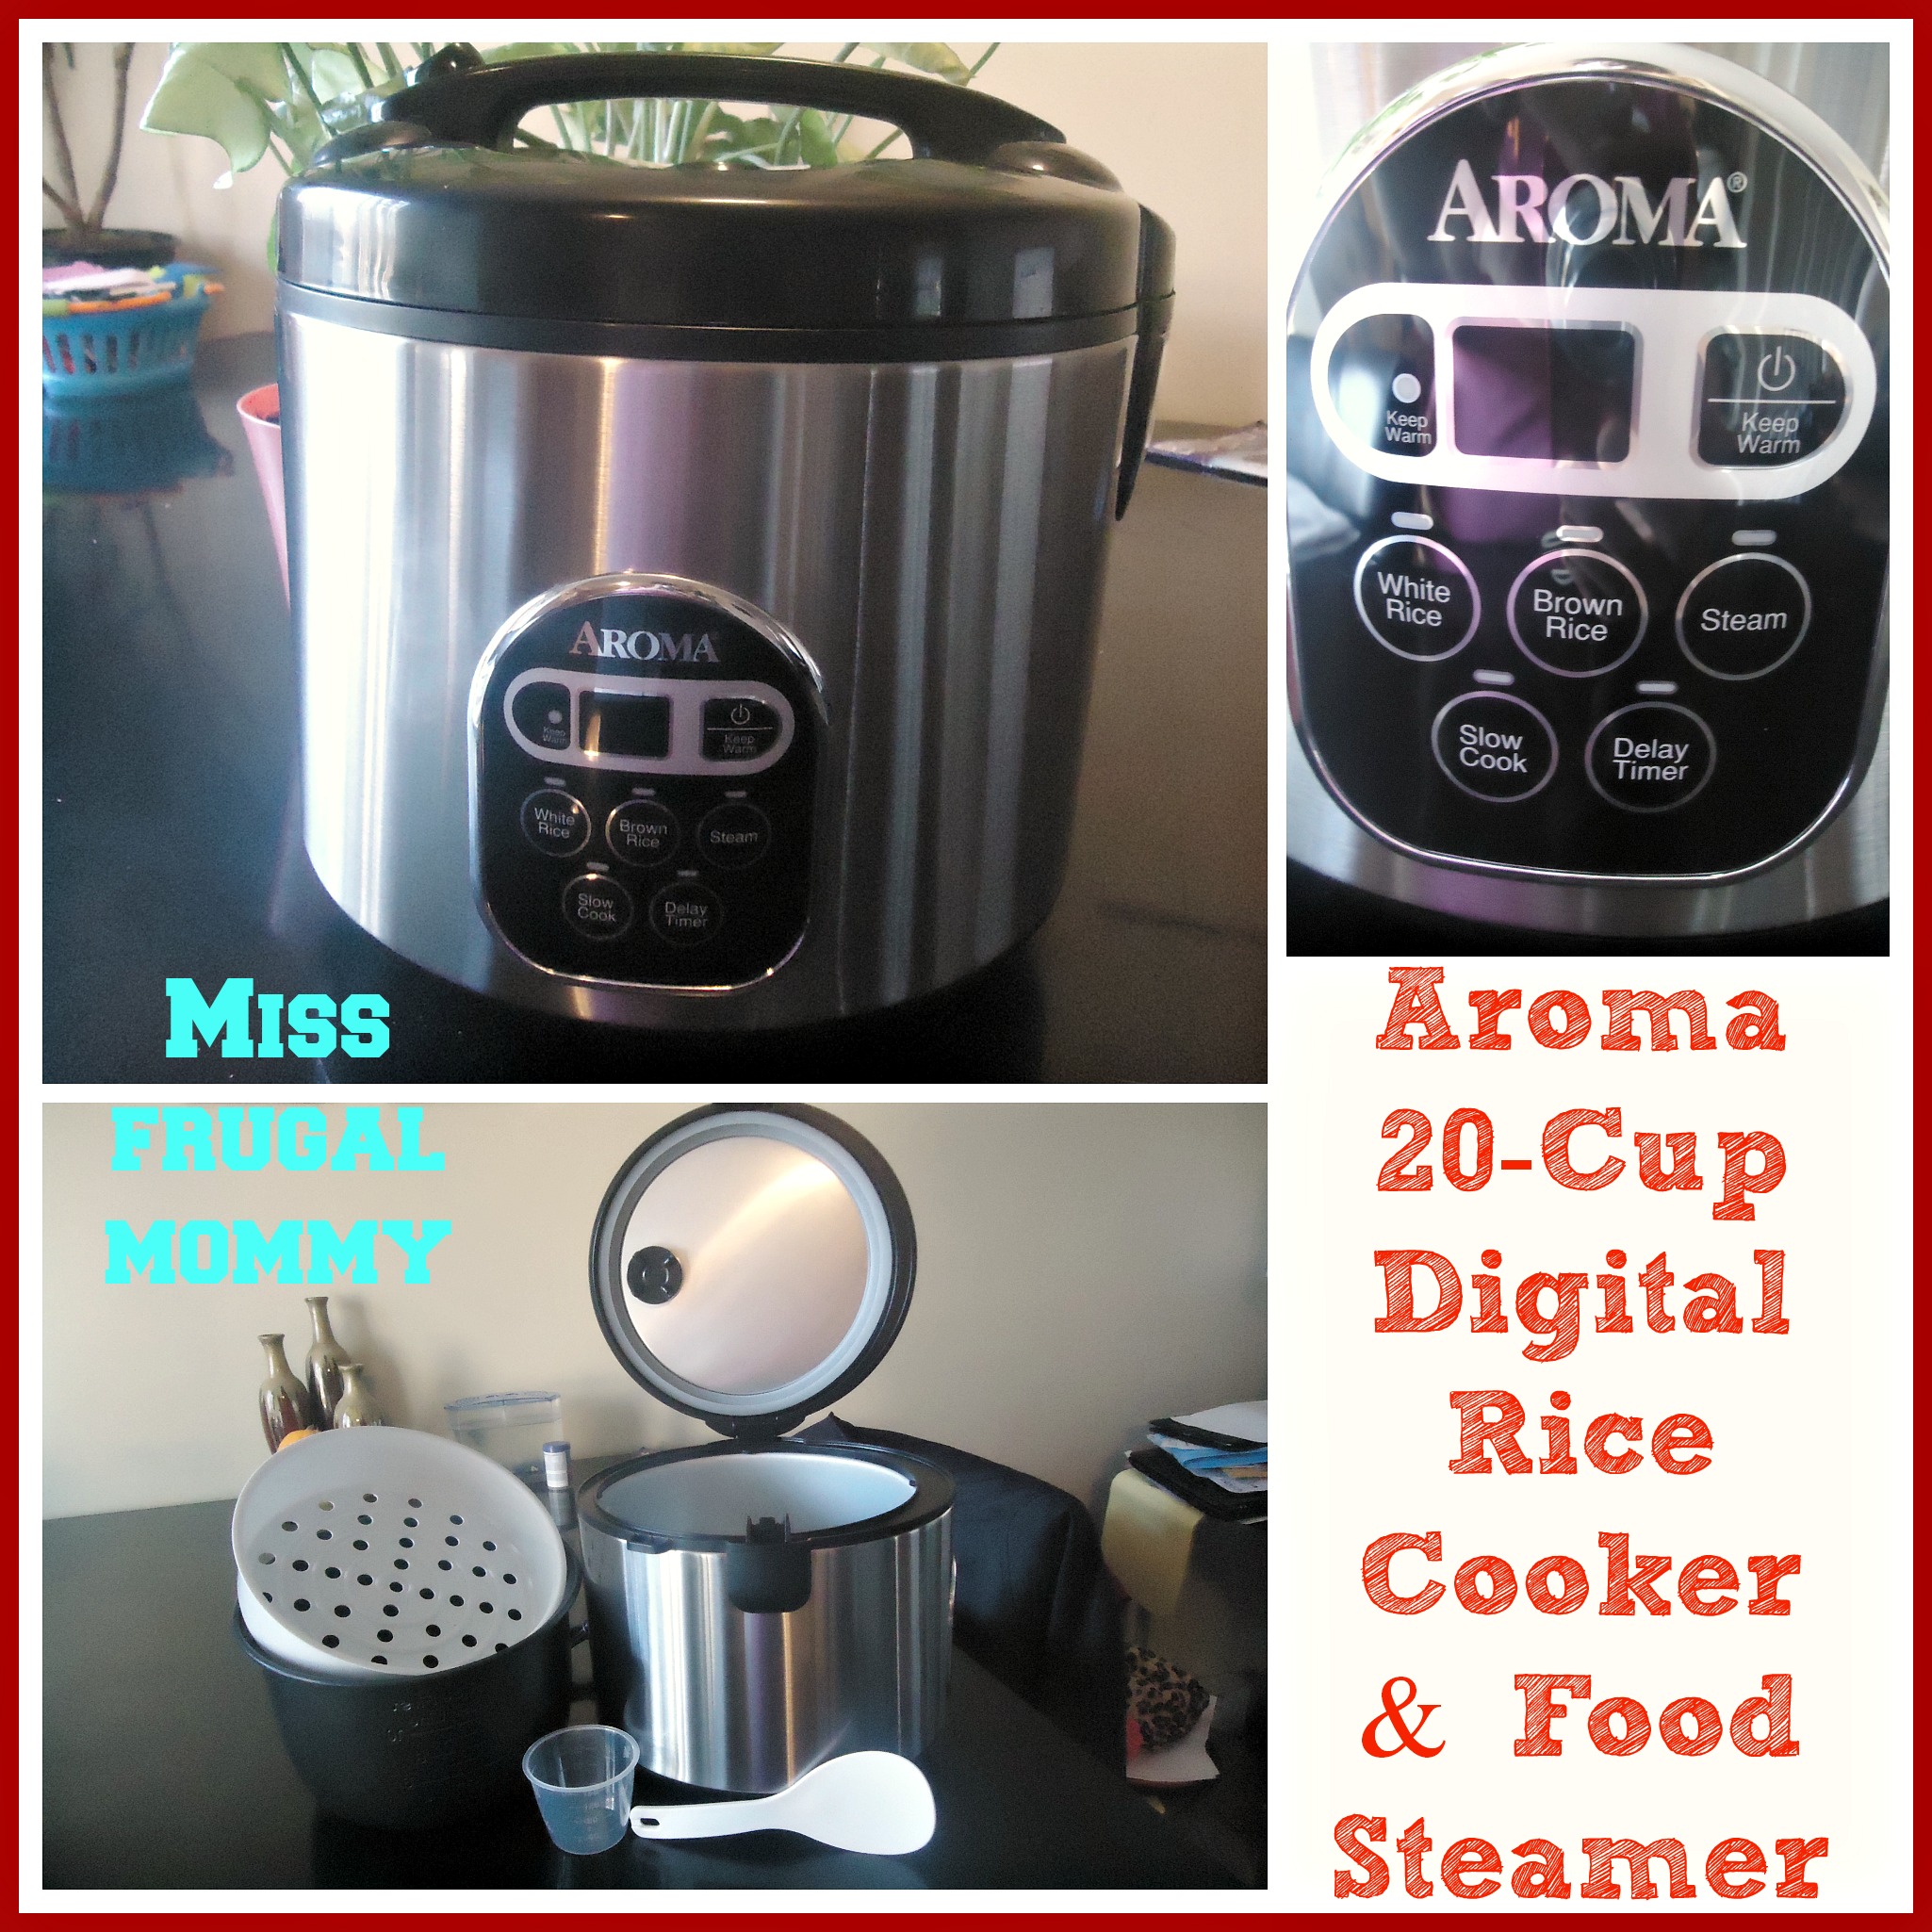 https://missfrugalmommy.com/wp-content/uploads/2013/12/rie-cooker-review.jpg